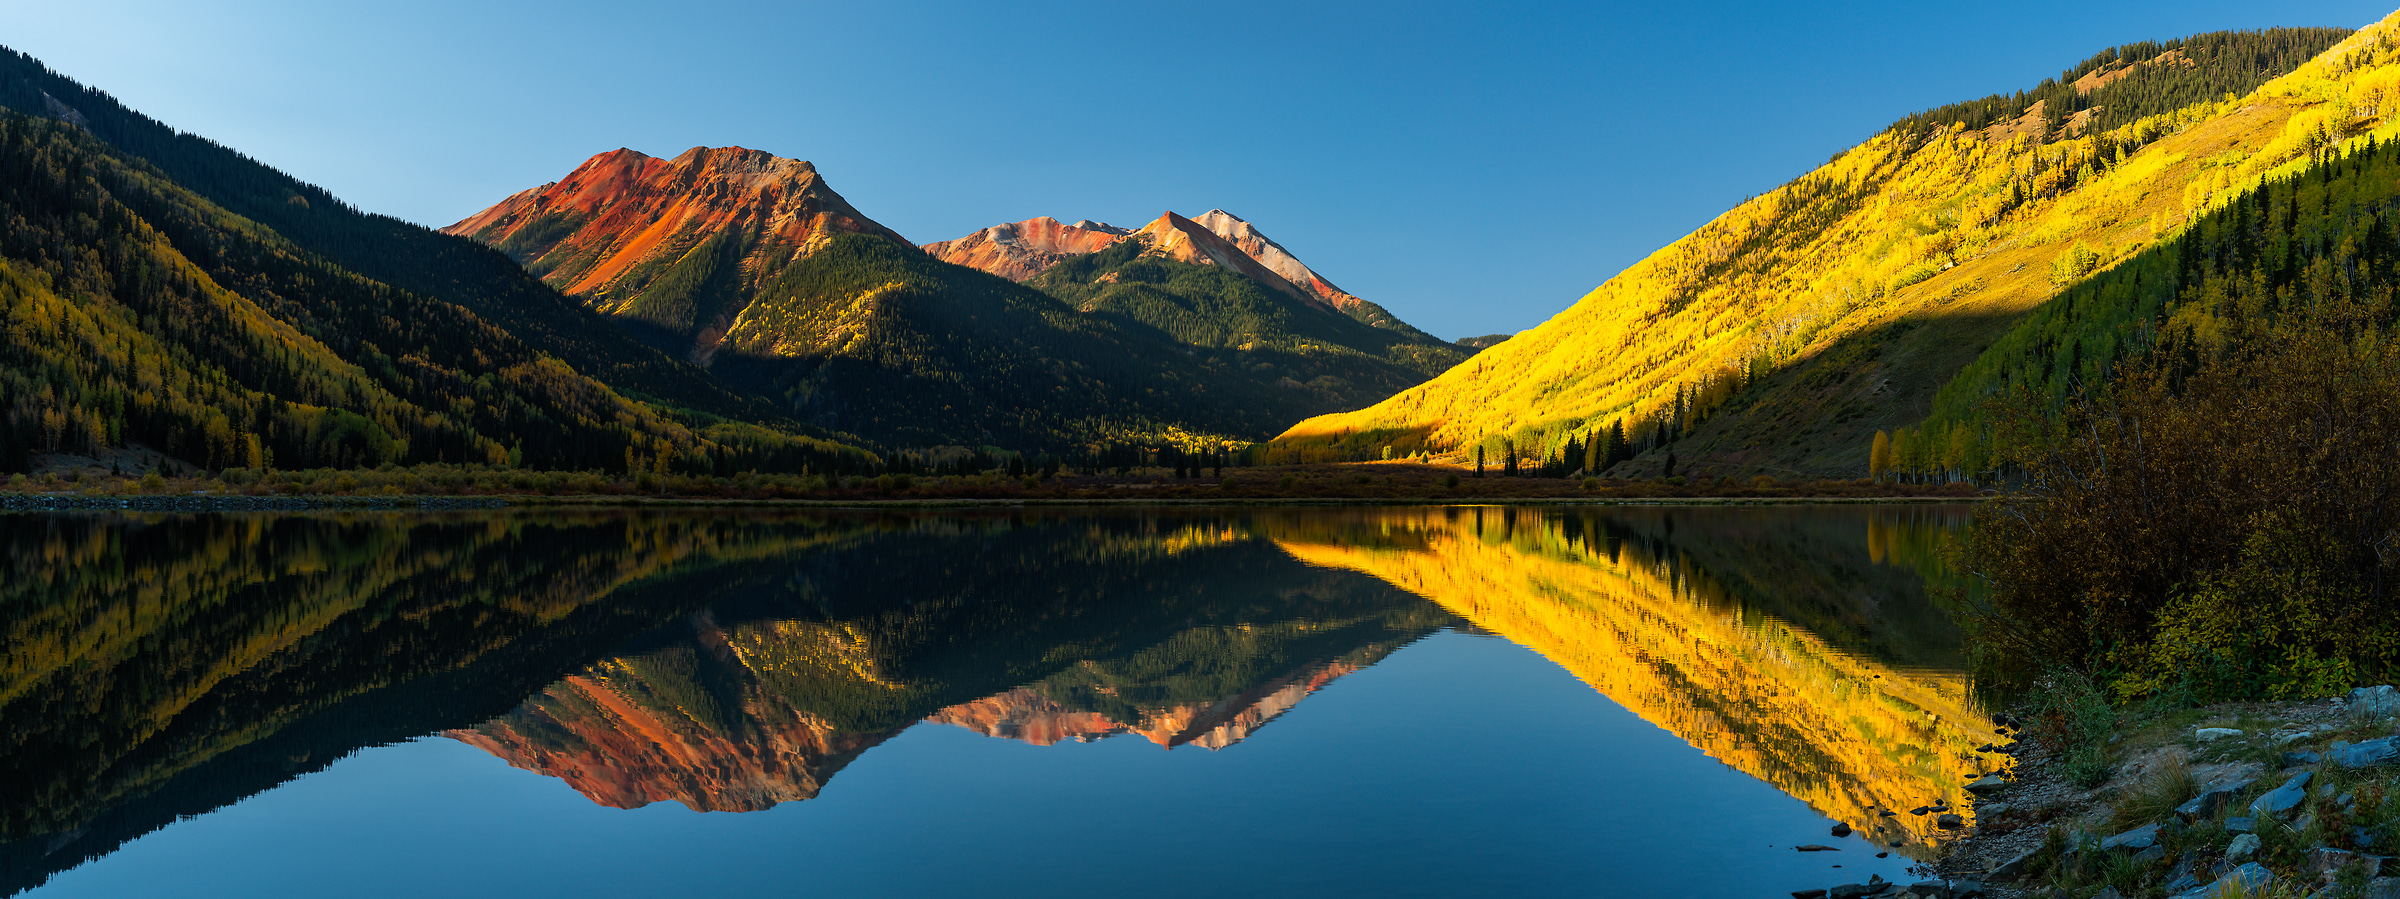 160 megapixels! A very high resolution, large-format VAST photo print of an autumn landscape with mountains and a lake; landscape photograph created by Phillip Noll in Ouray, Colorado.